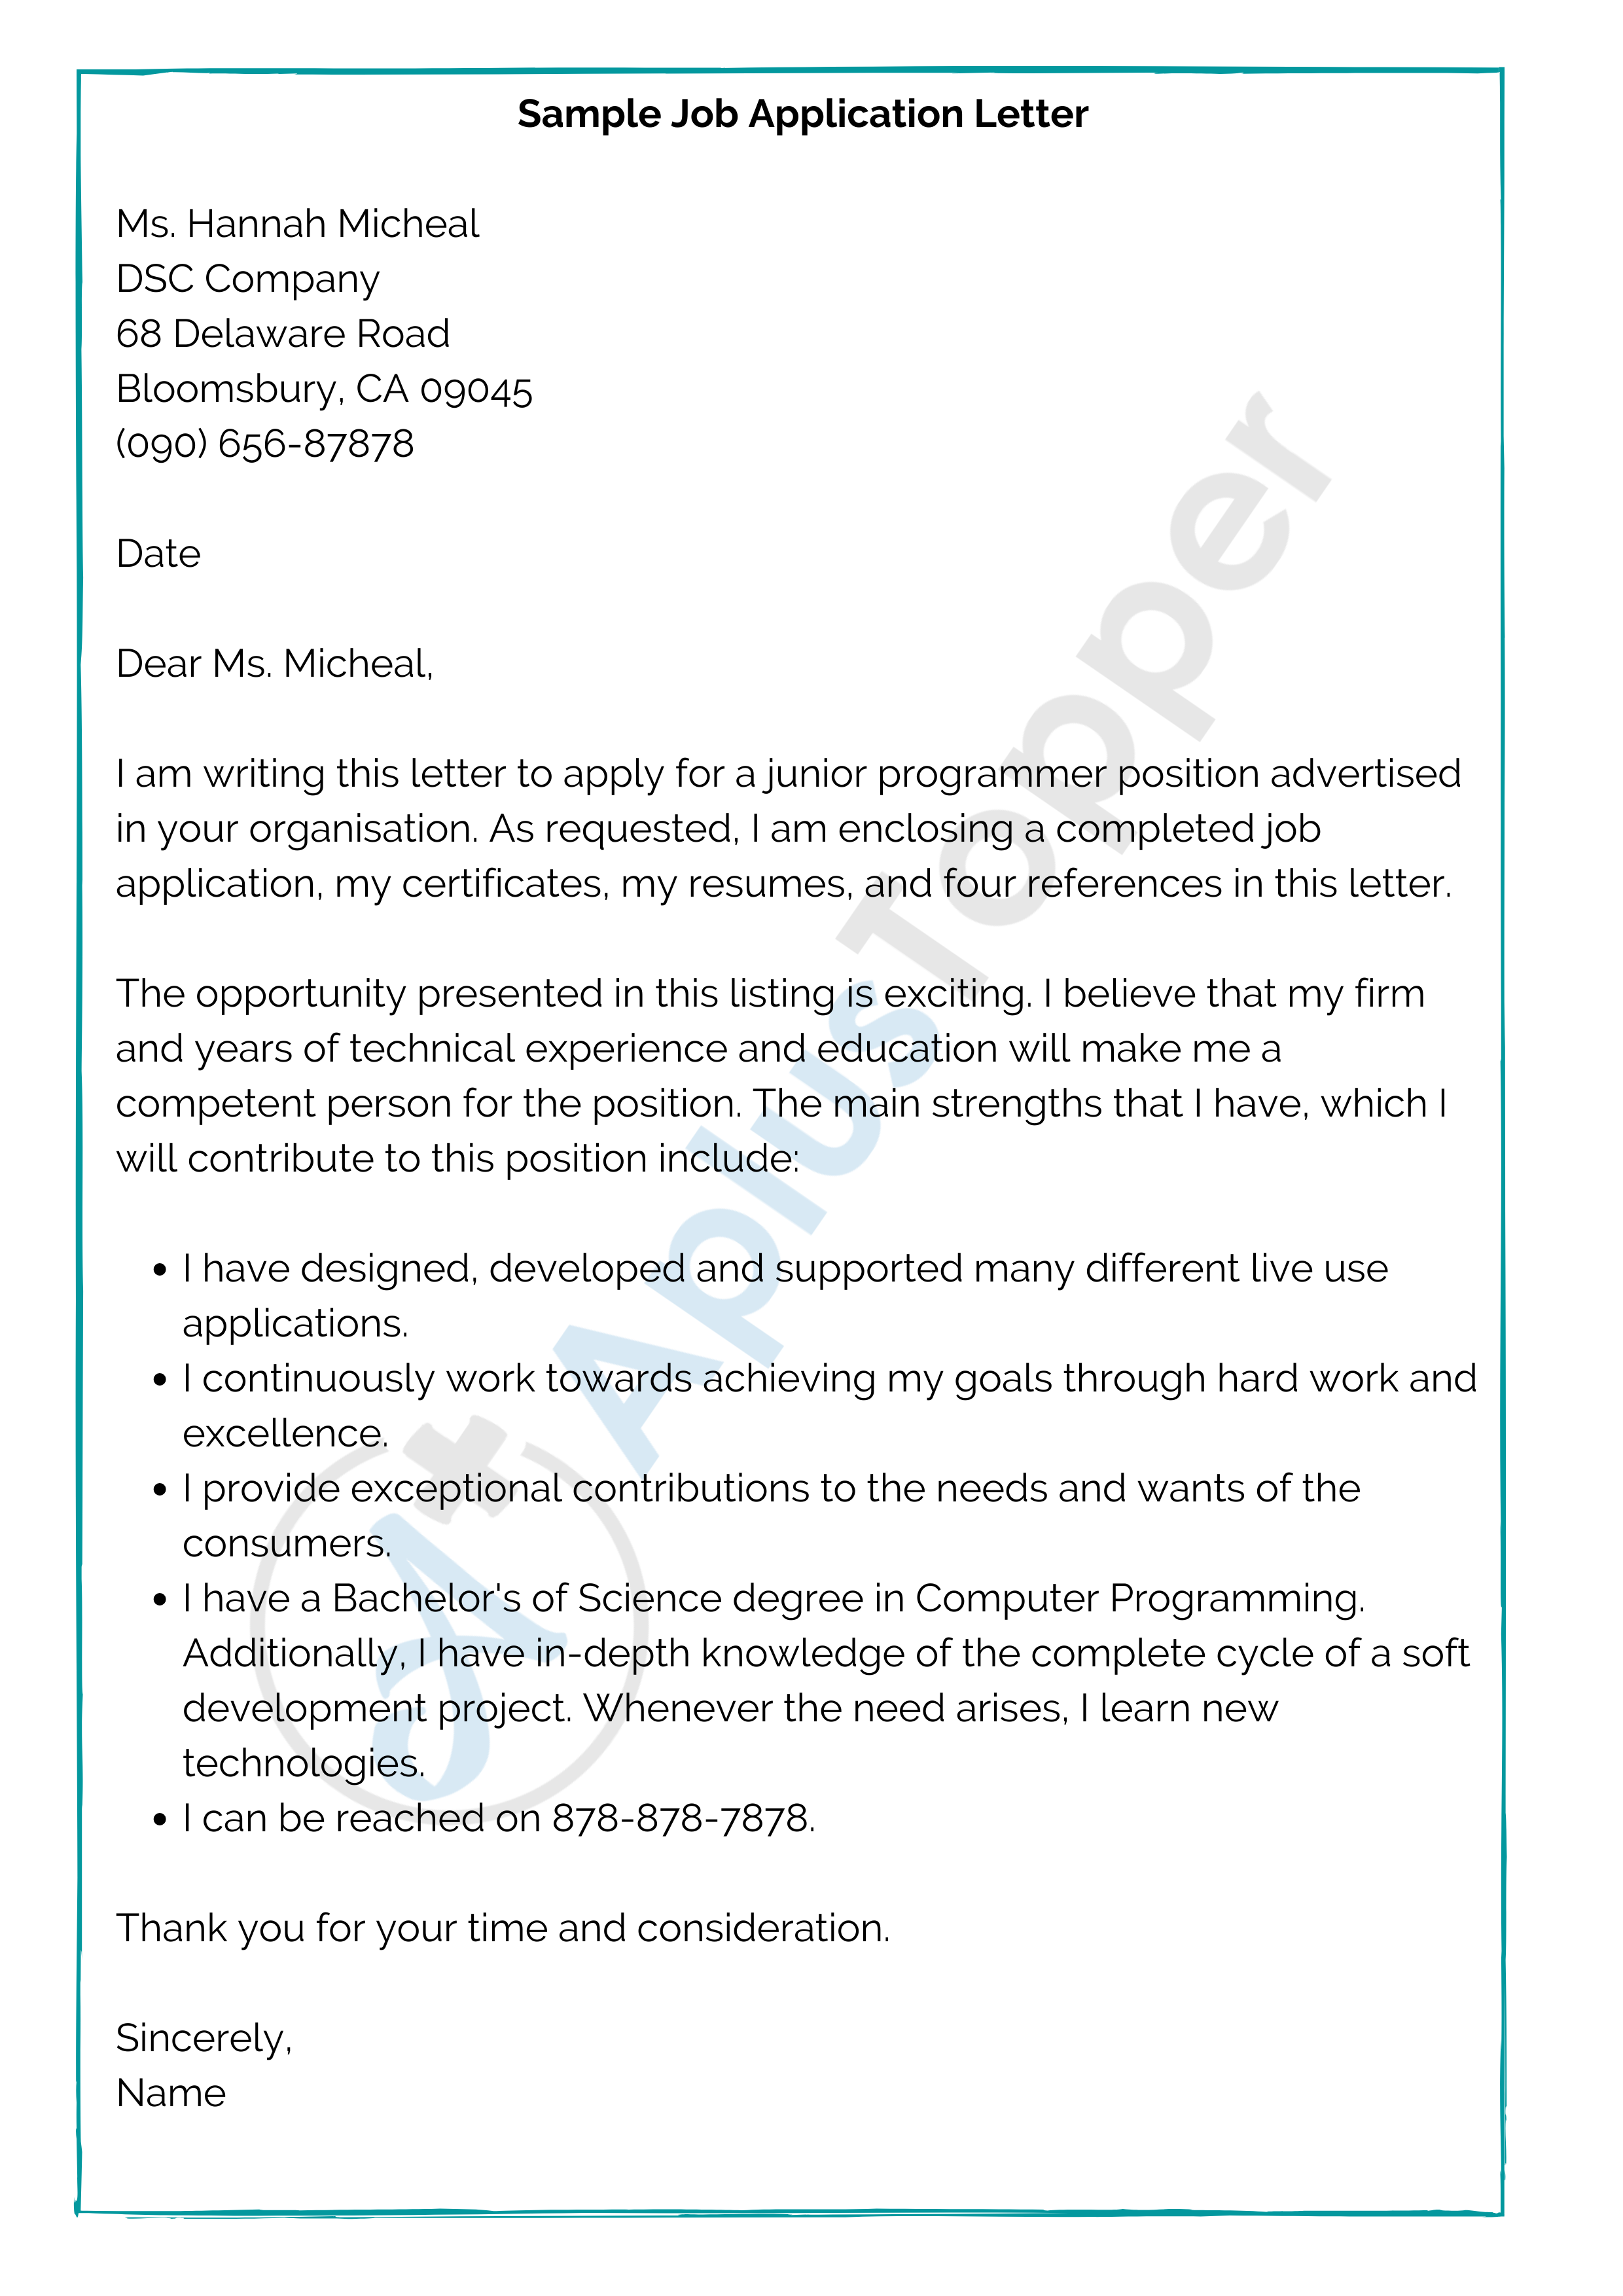 job application letter writing examples